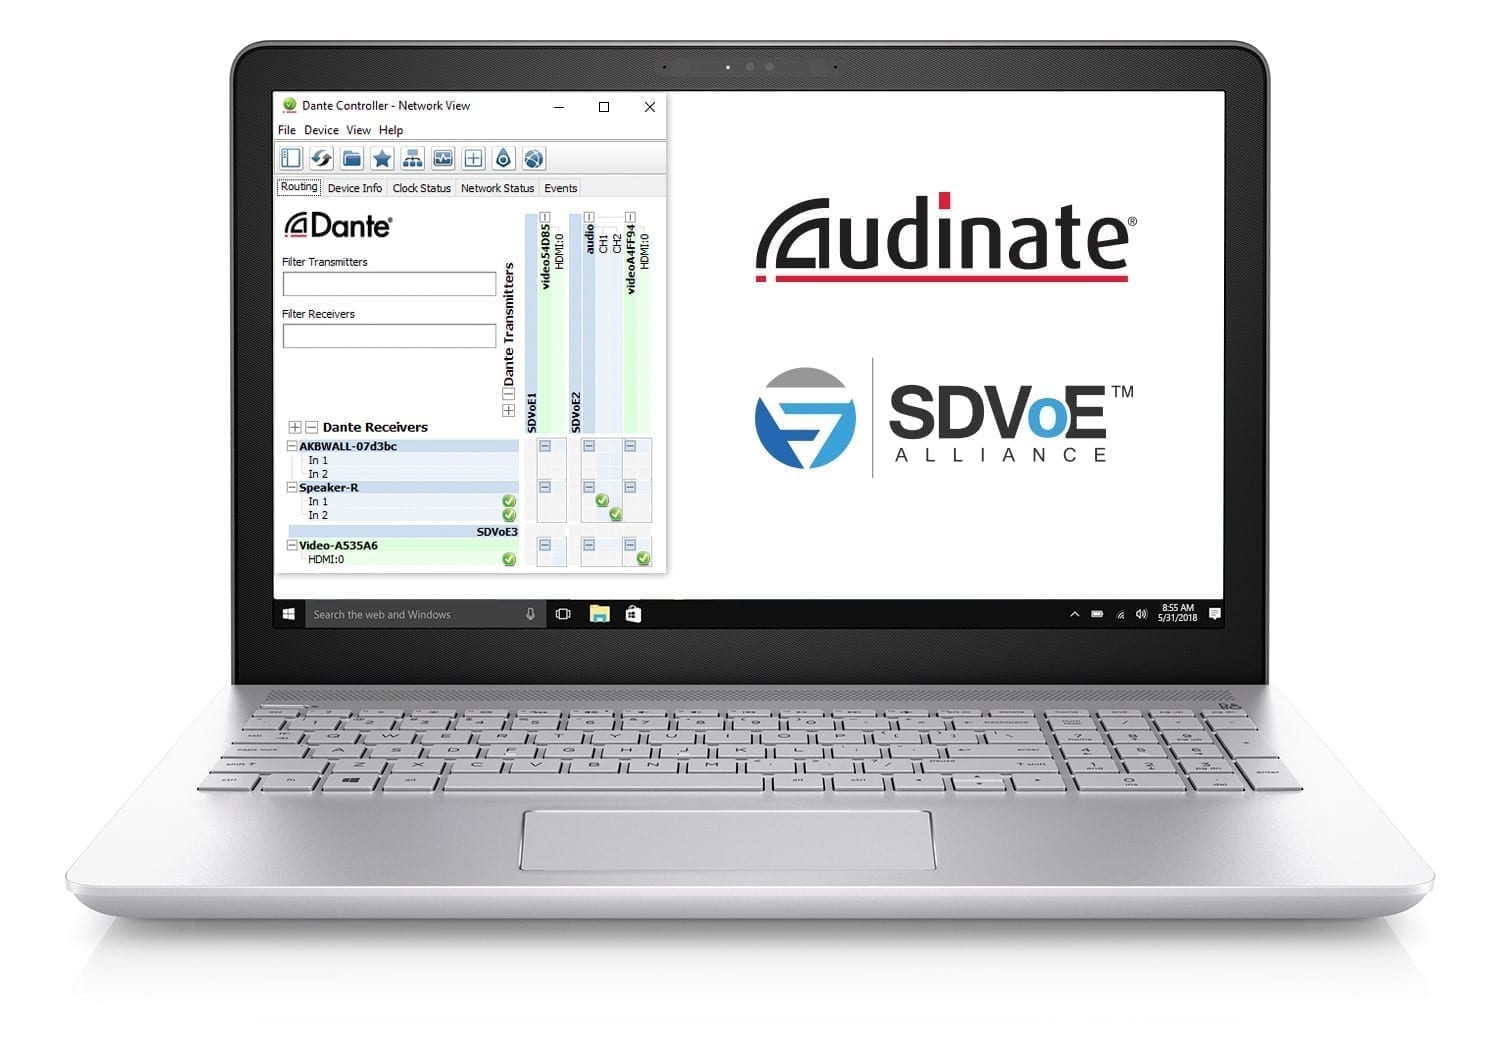 SDVoE Alliance & Audinate Collaborate on Integrated Audio and Video Control Platform